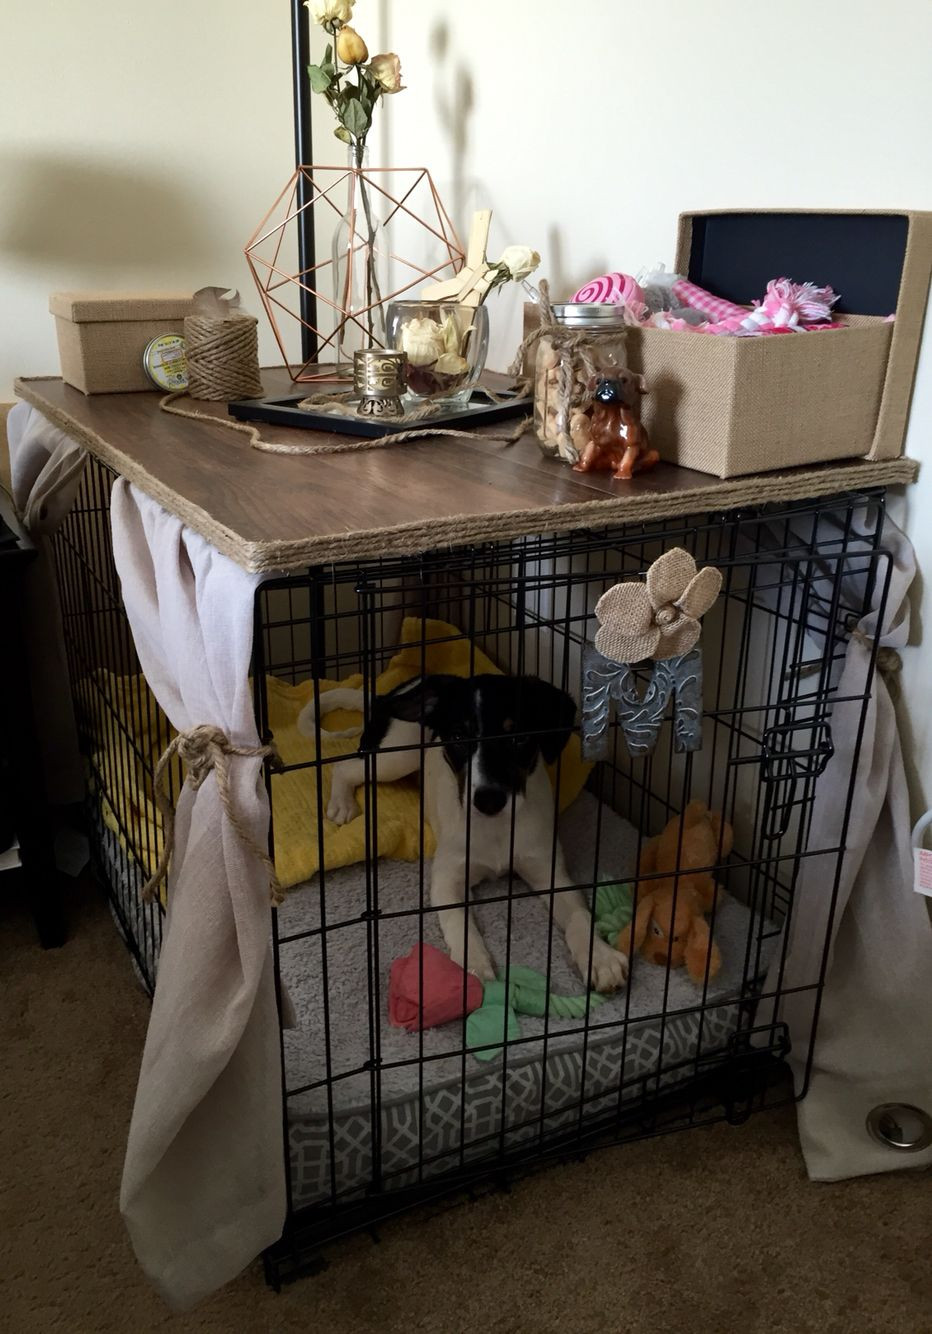 DIY Wood Dog Crate Cover
 DIY Dog Crate Cover that s a table No Sew super easy